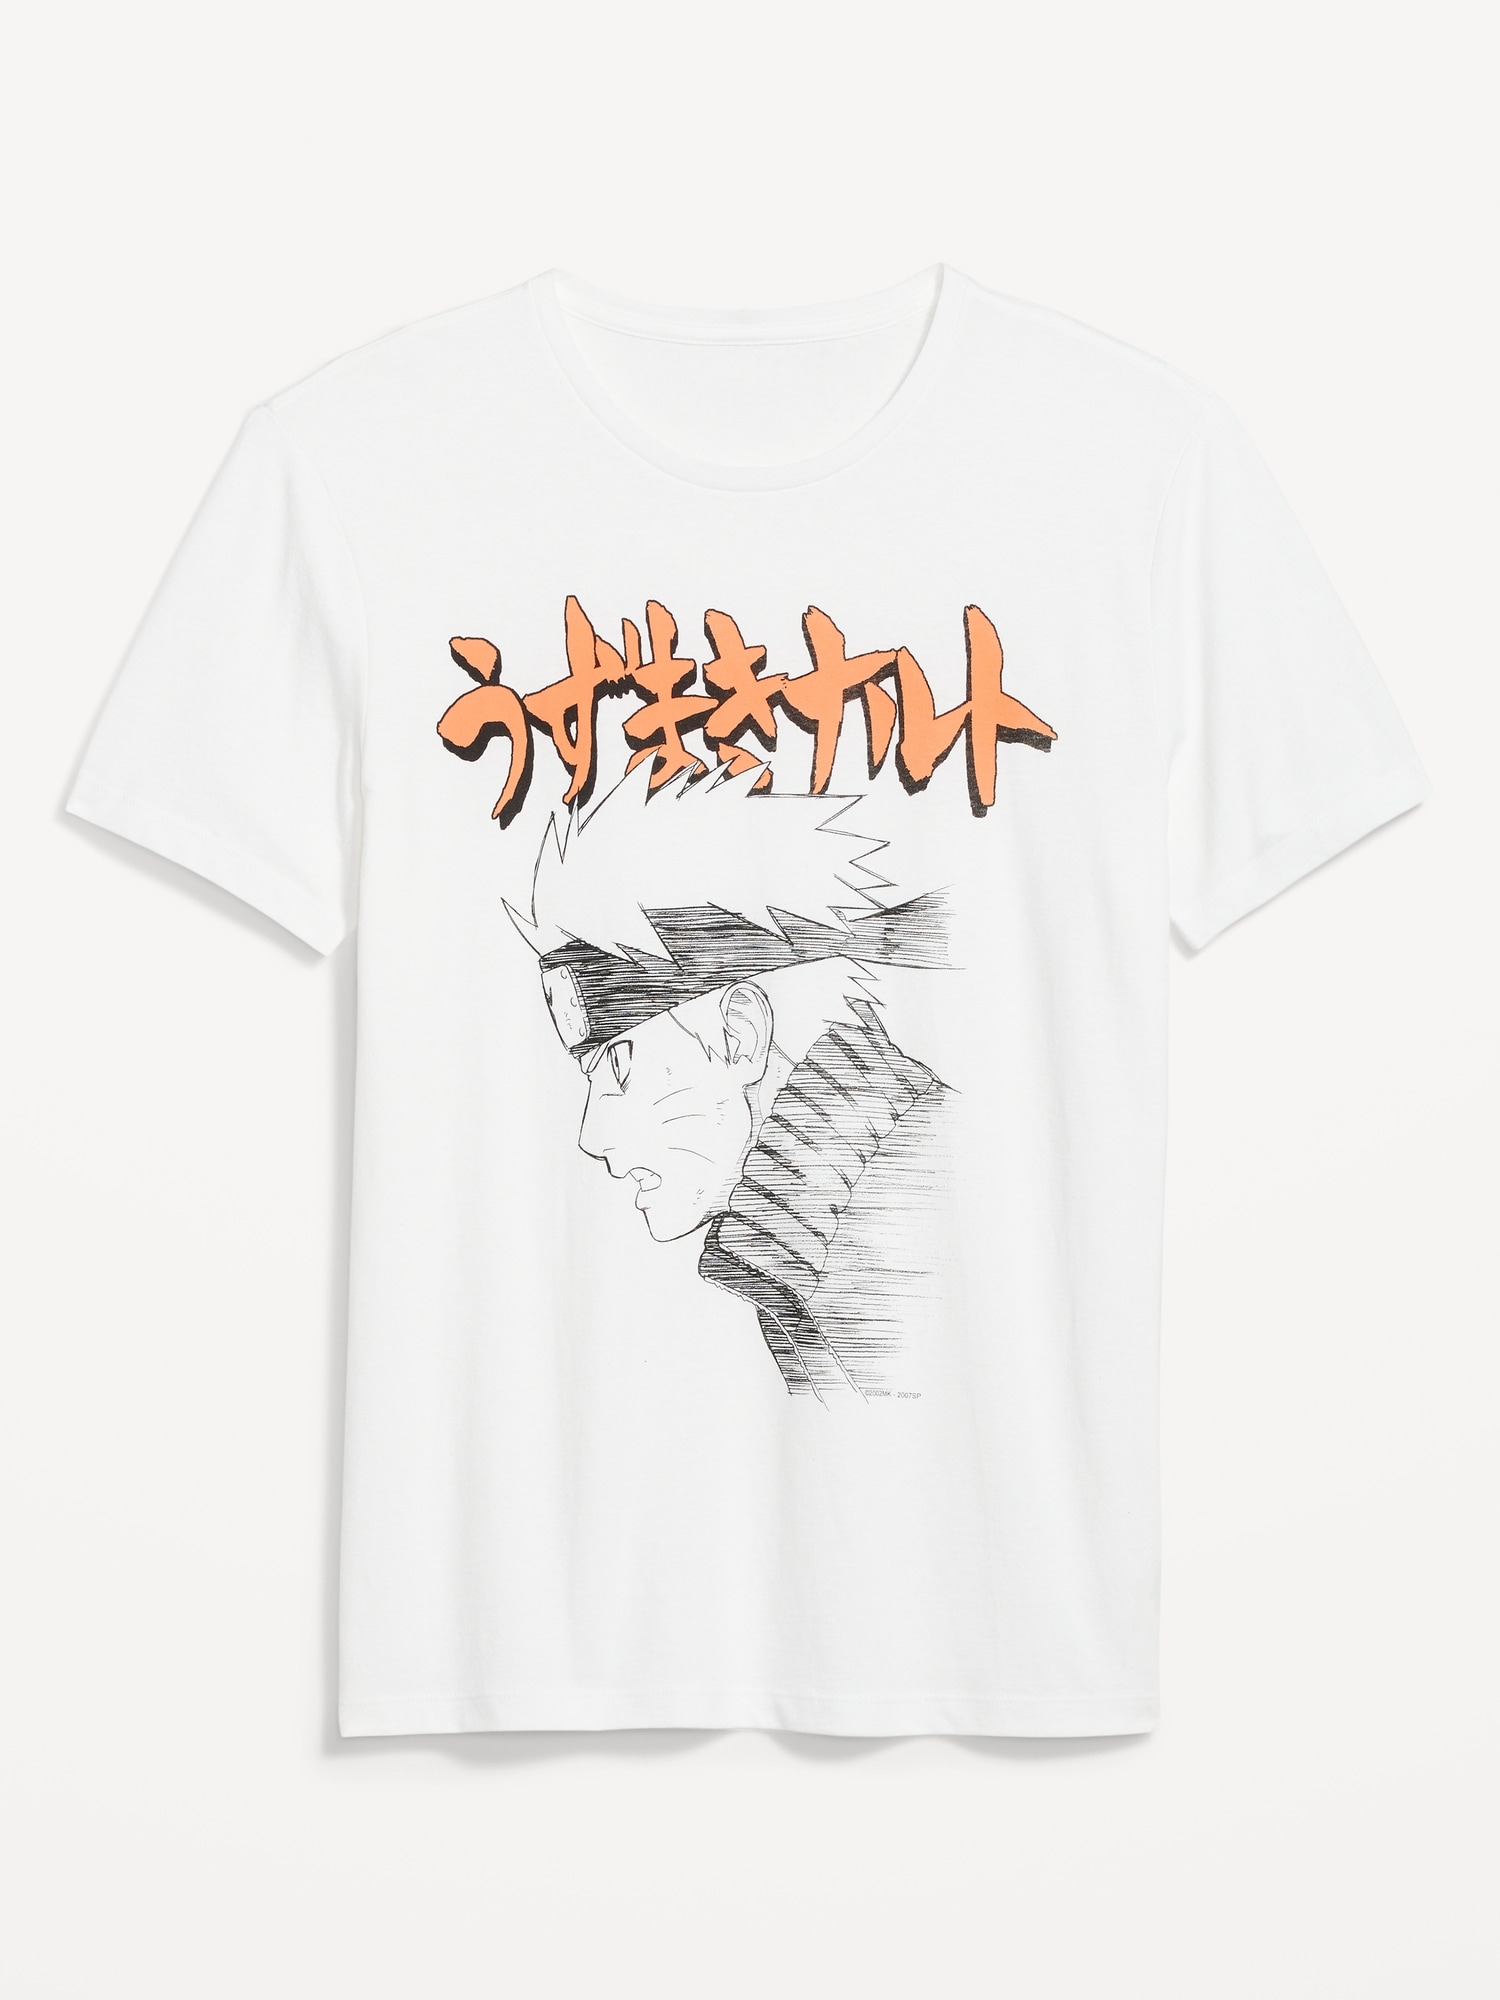 Naruto™ Gender-Neutral T-Shirt for Adults